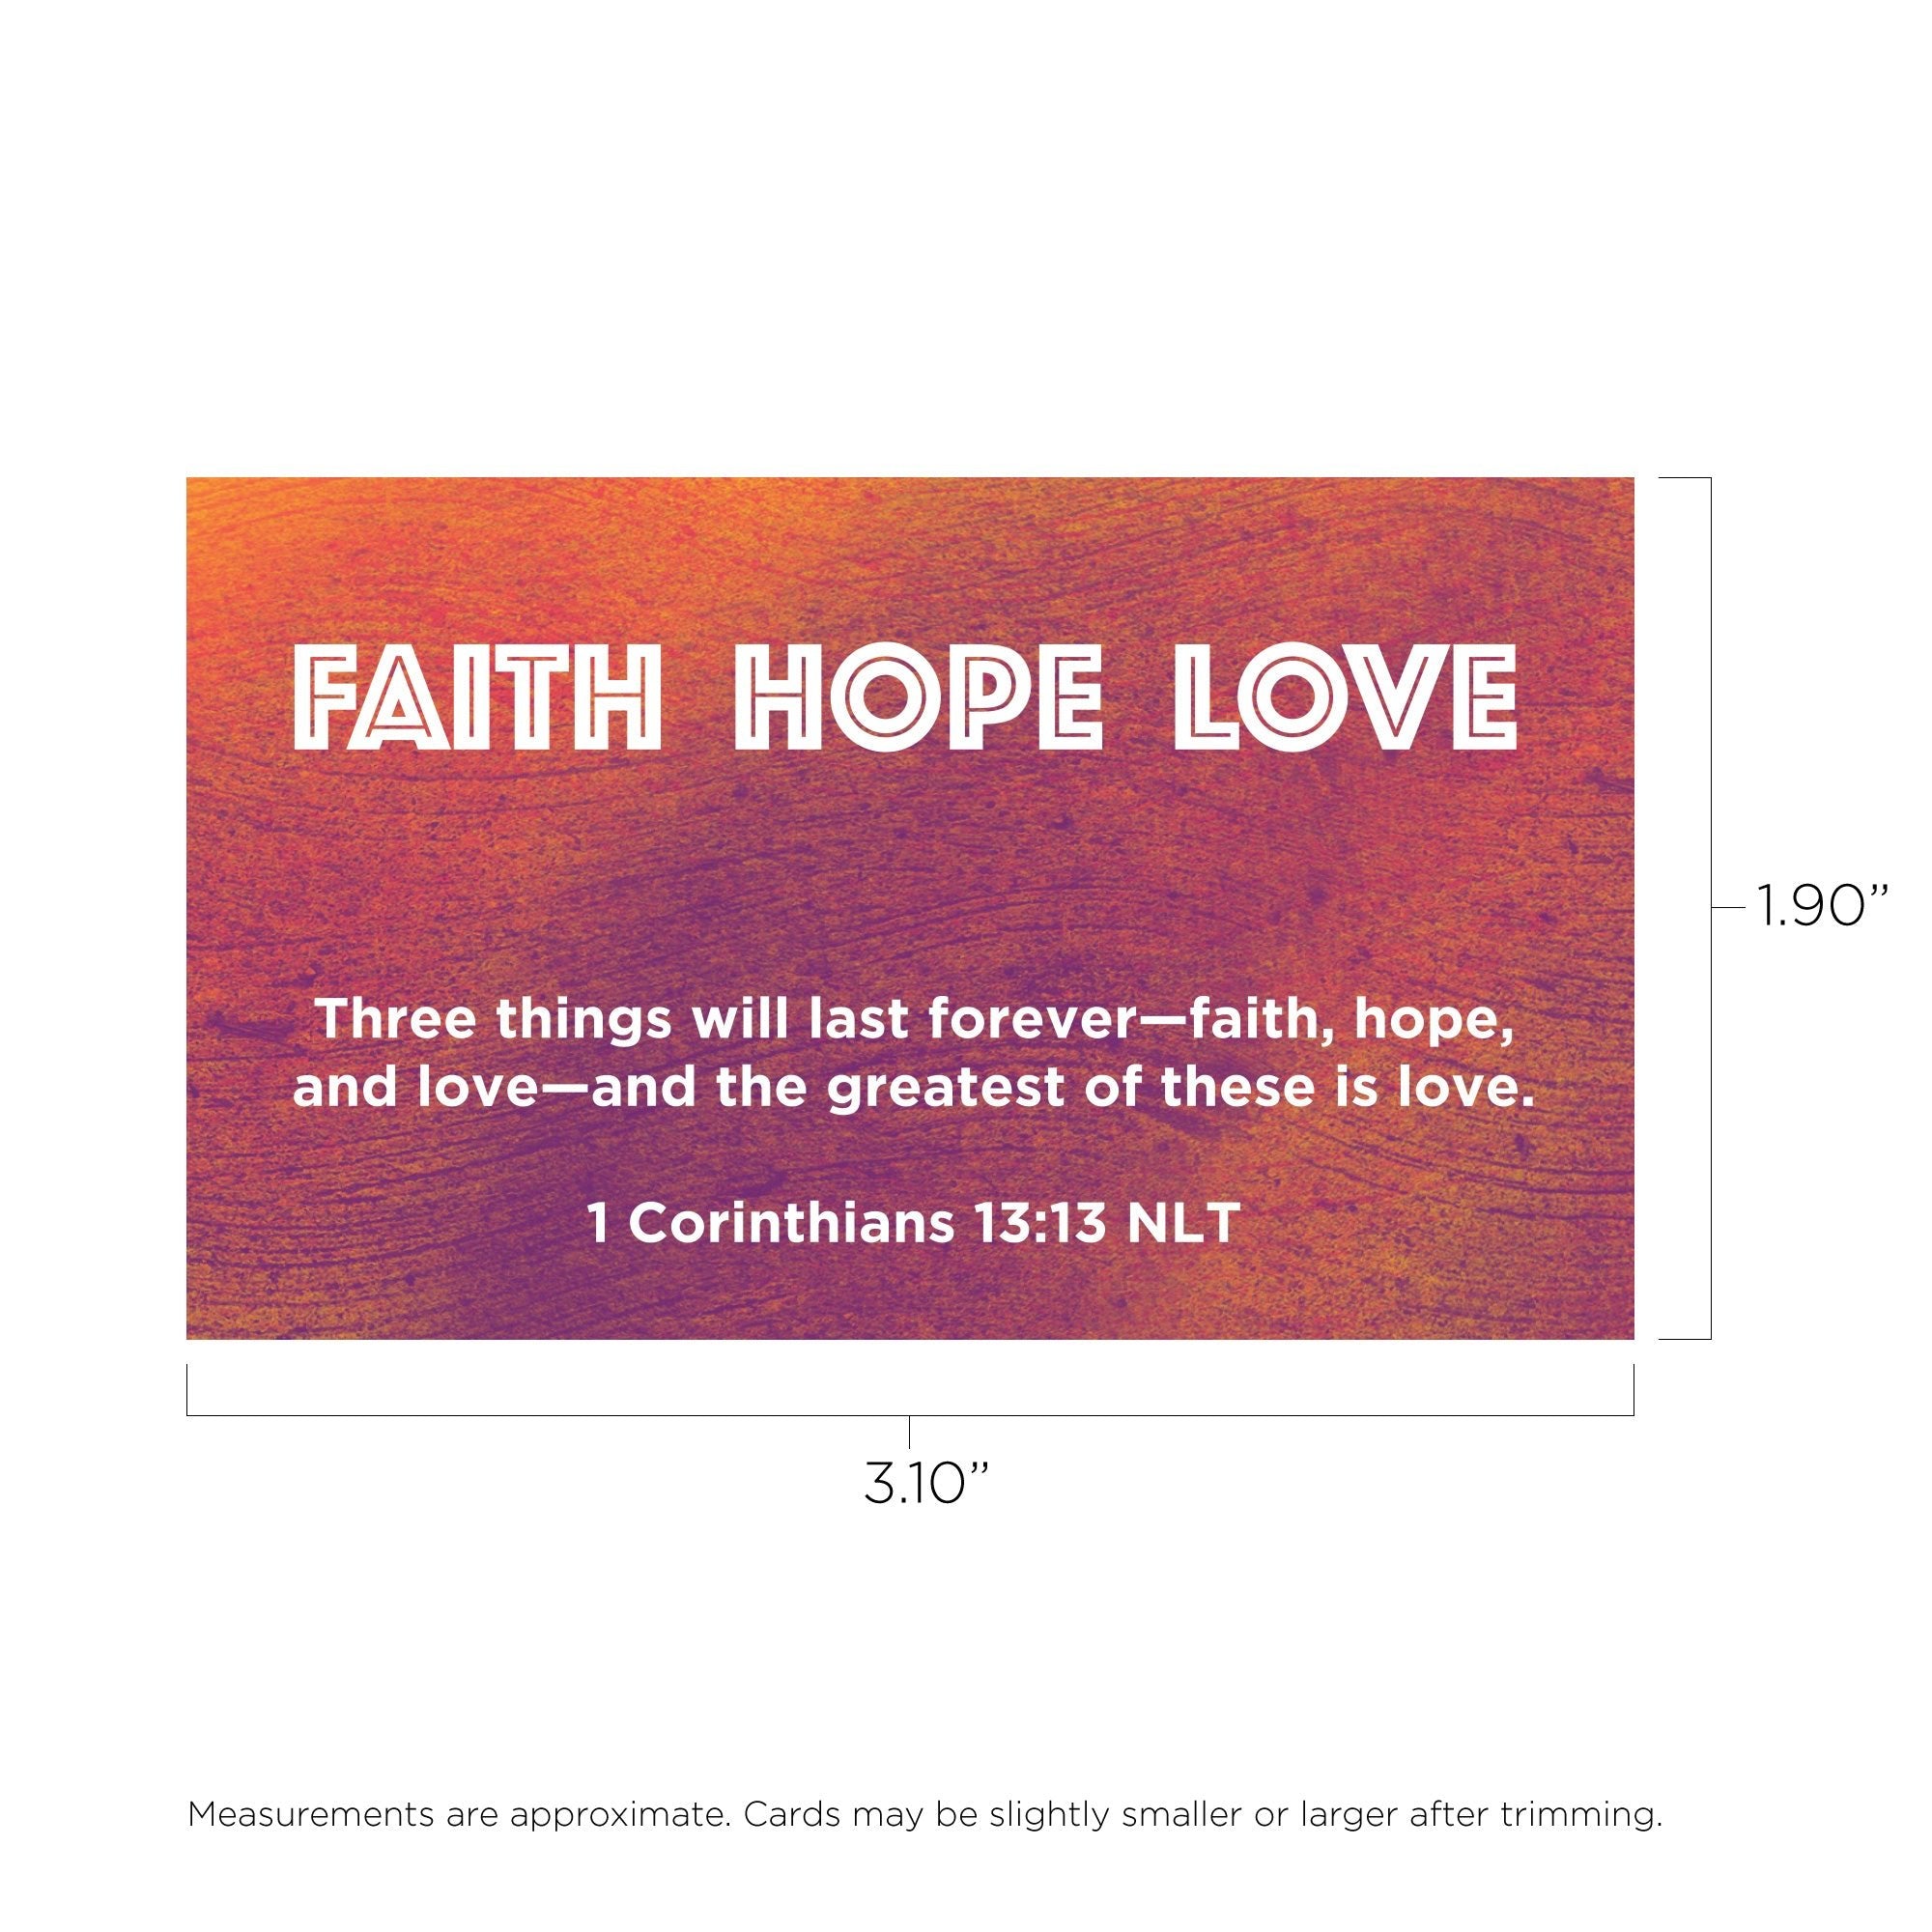 Children and Youth, Pass Along Scripture Cards, Faith Hope Love, 1 Corinthians 13:13, Pack of 25